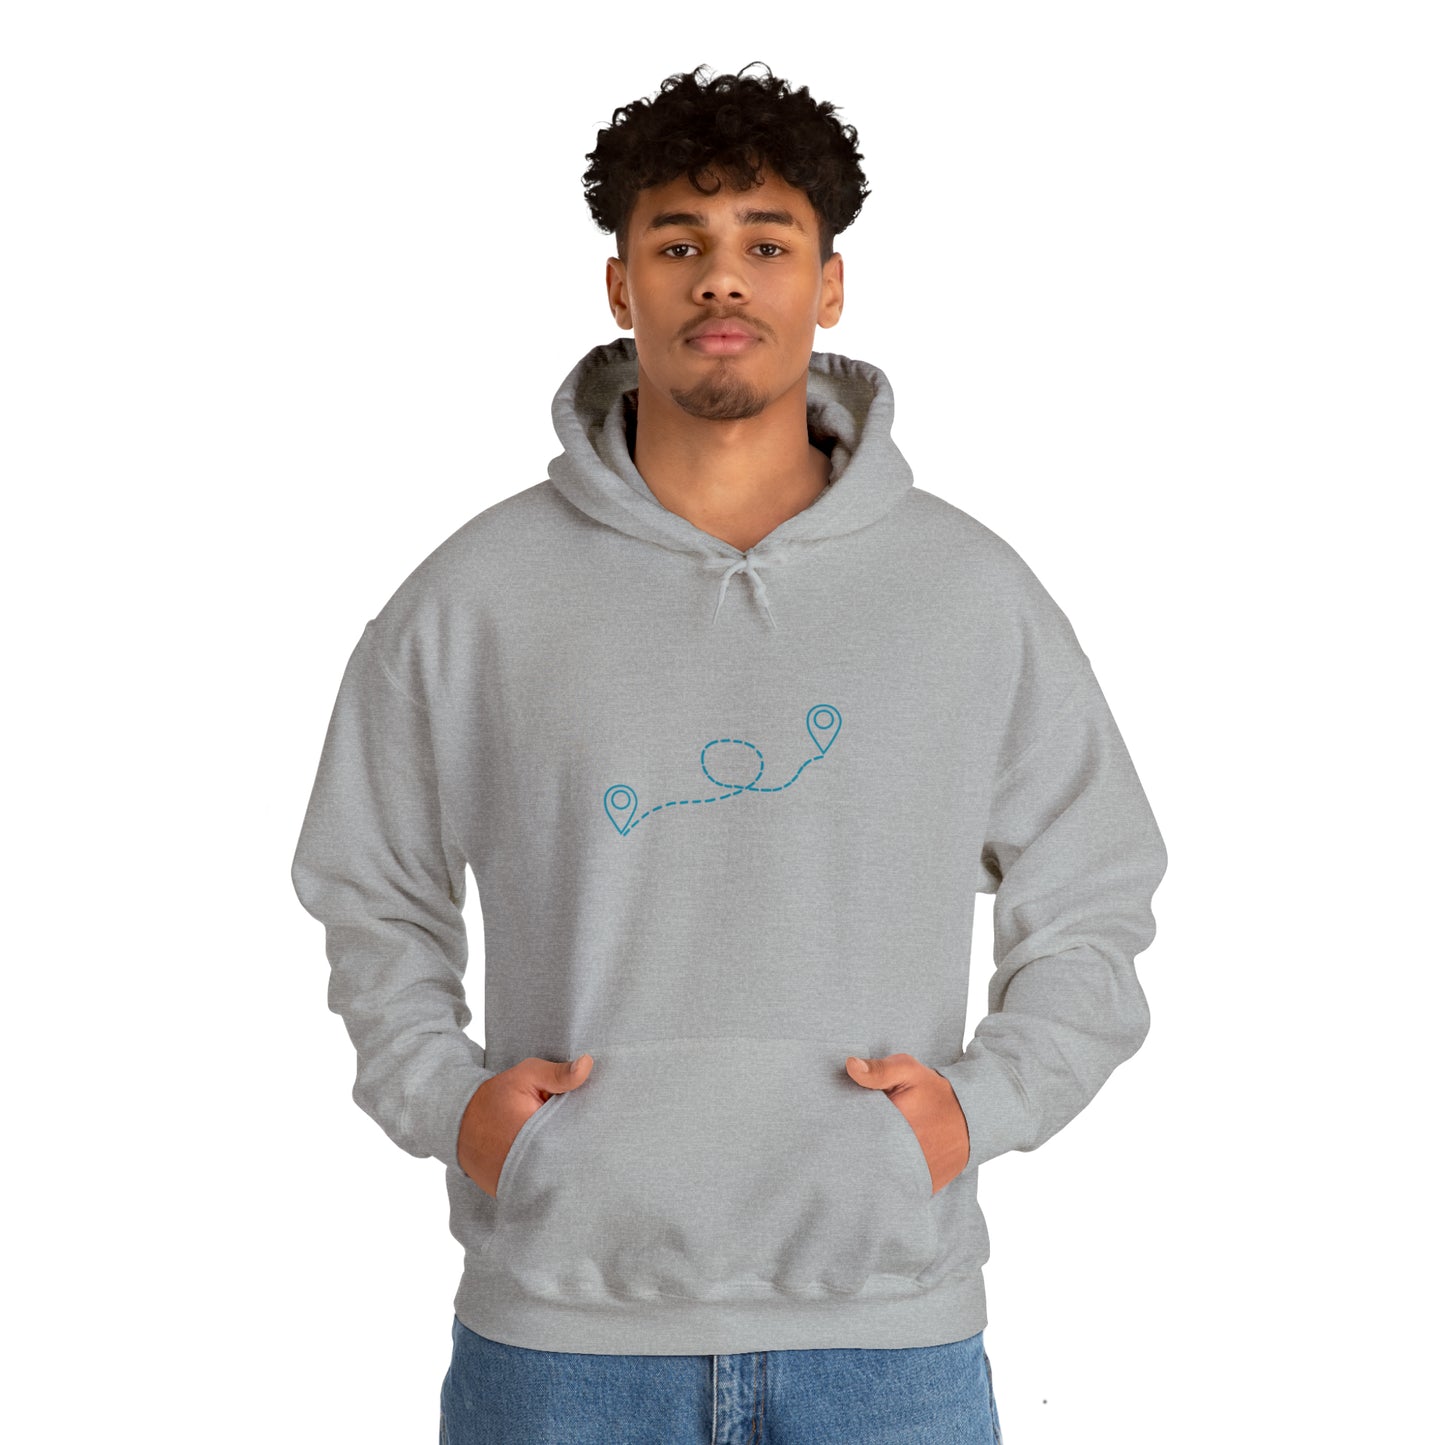 You'll Get There Eventually Location Hooded Sweatshirt